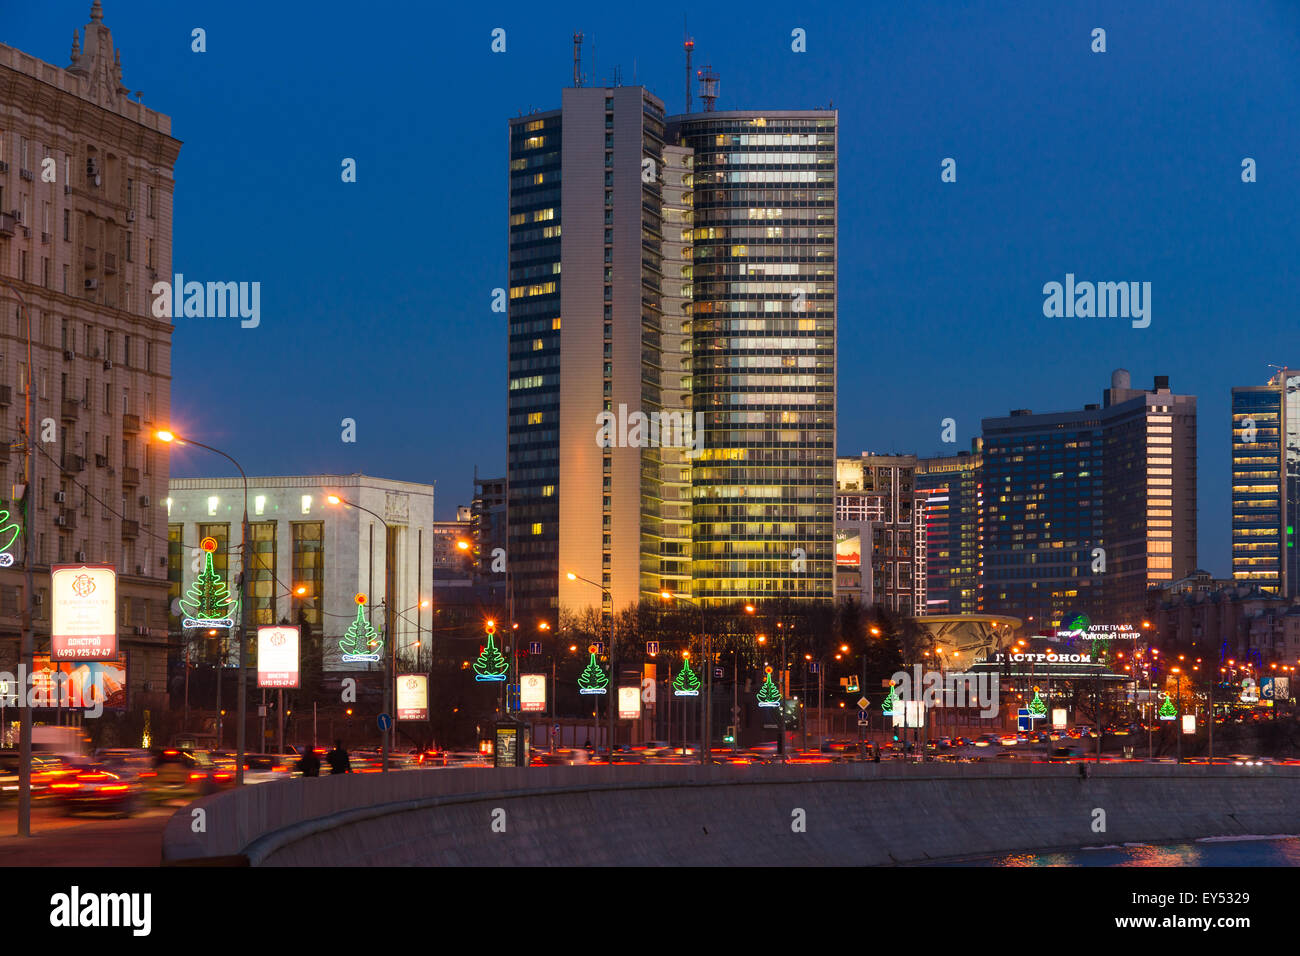 Office of Moscow Government (former building of the planned economy countries' Council for Mutual Economic Assistance) Stock Photo